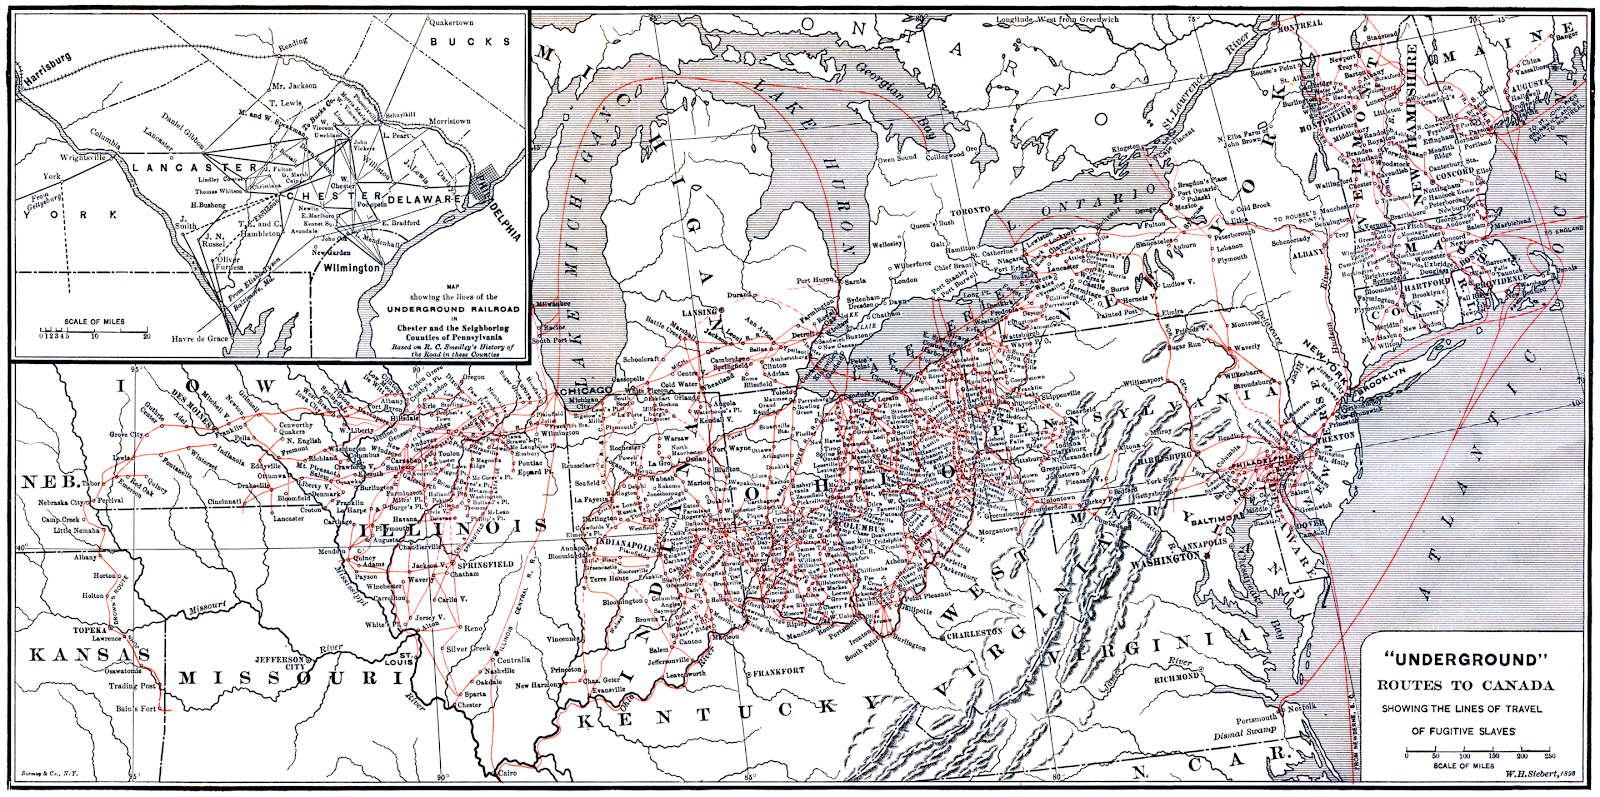 An 1898 map of Underground Railroad routes to Canada | Public domain via Wikimedia Commons